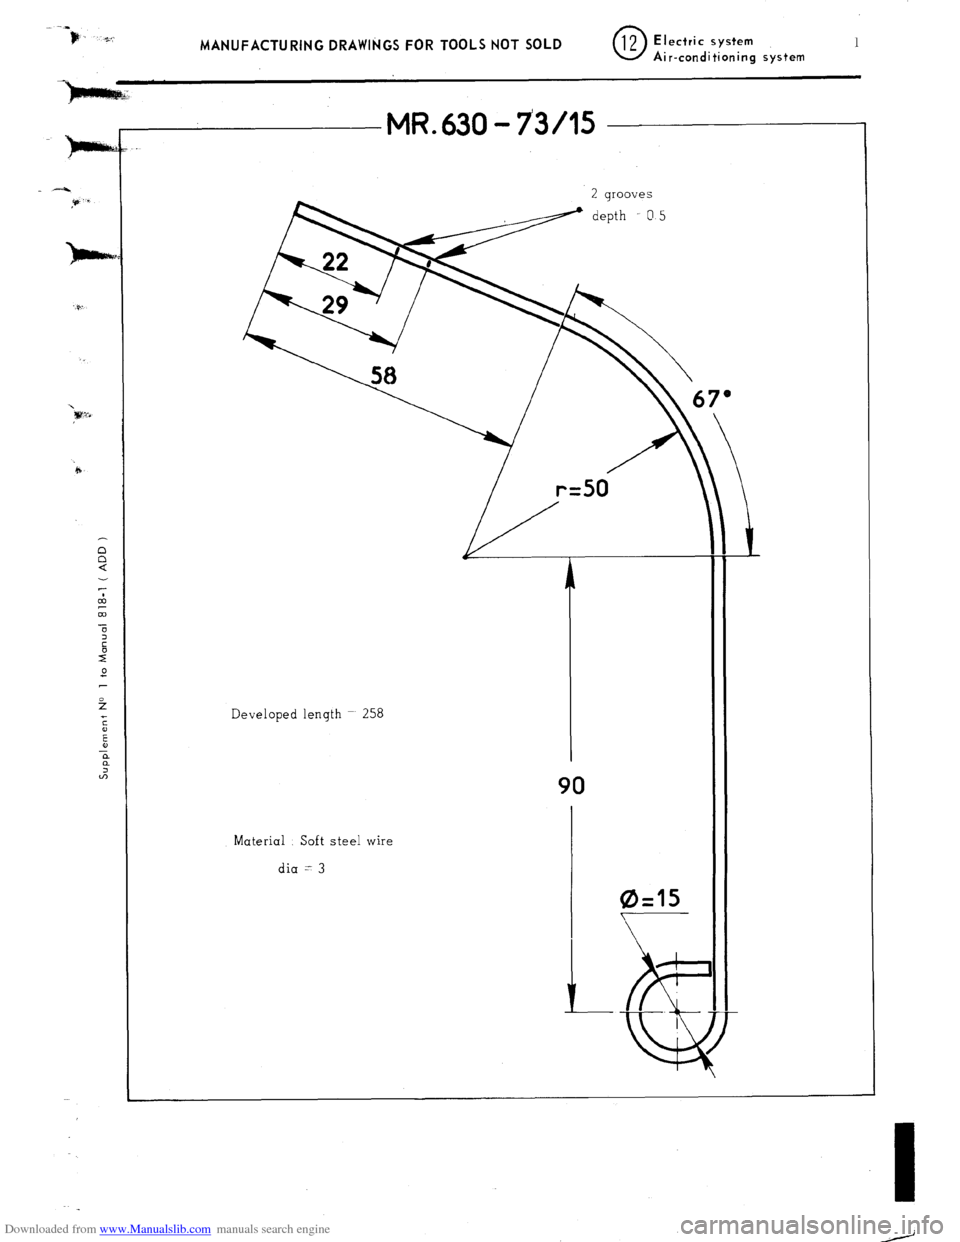 Citroen CX 1985 1.G Workshop Manual Downloaded from www.Manualslib.com manuals search engine MANUFACTURING DRAWINGS FOR TOOLS NOT SOLD 0 12 Electric system 1 Air-conditioning system n 
n 
a 
MR. 630 - 7305 
Developed length ~ 258 
Mater